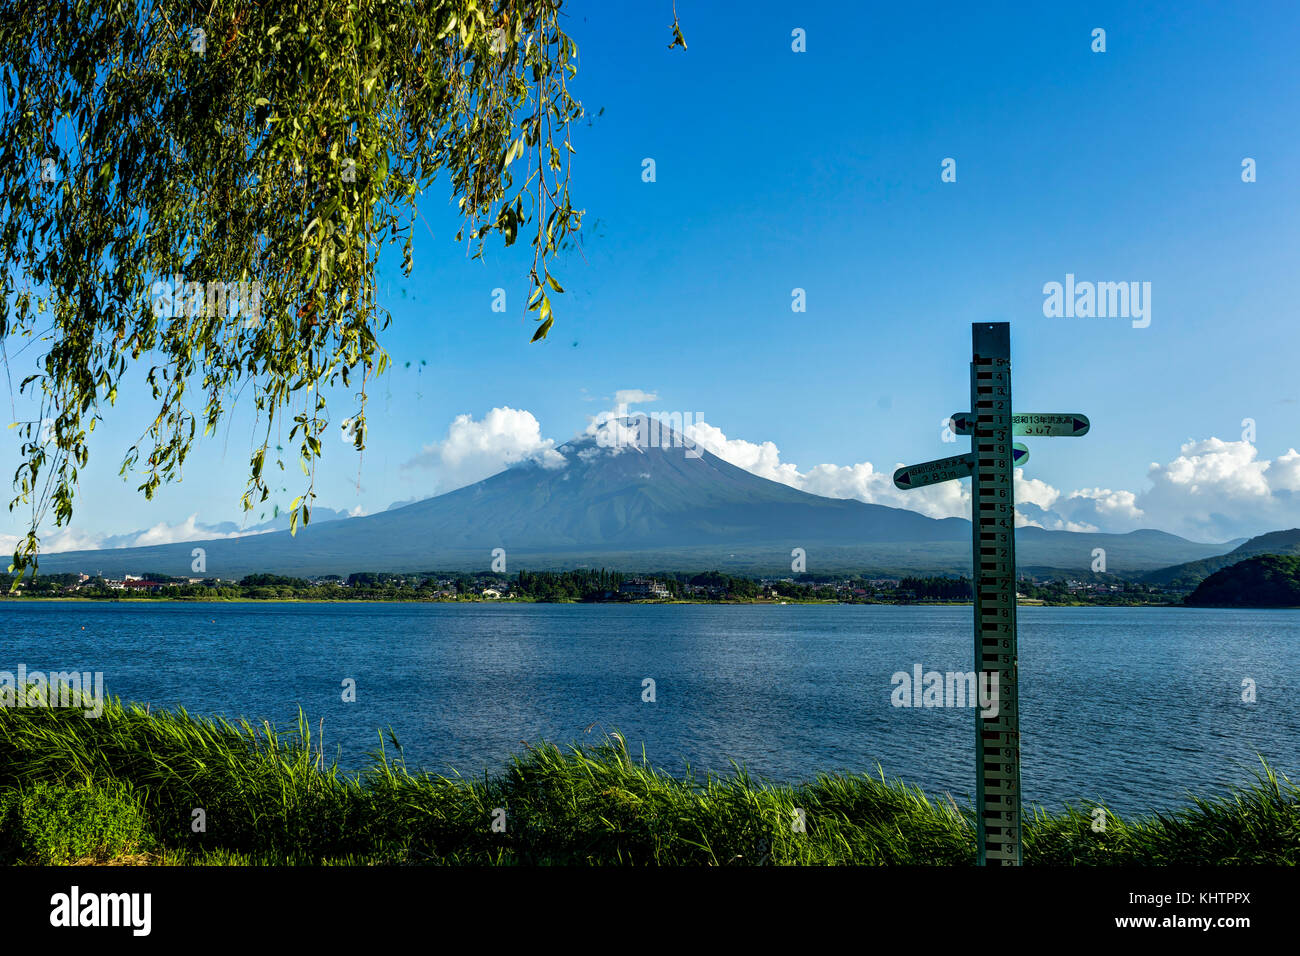 View to Mount Fuji with Flowers in Summer with blue sky and clou Stock Photo